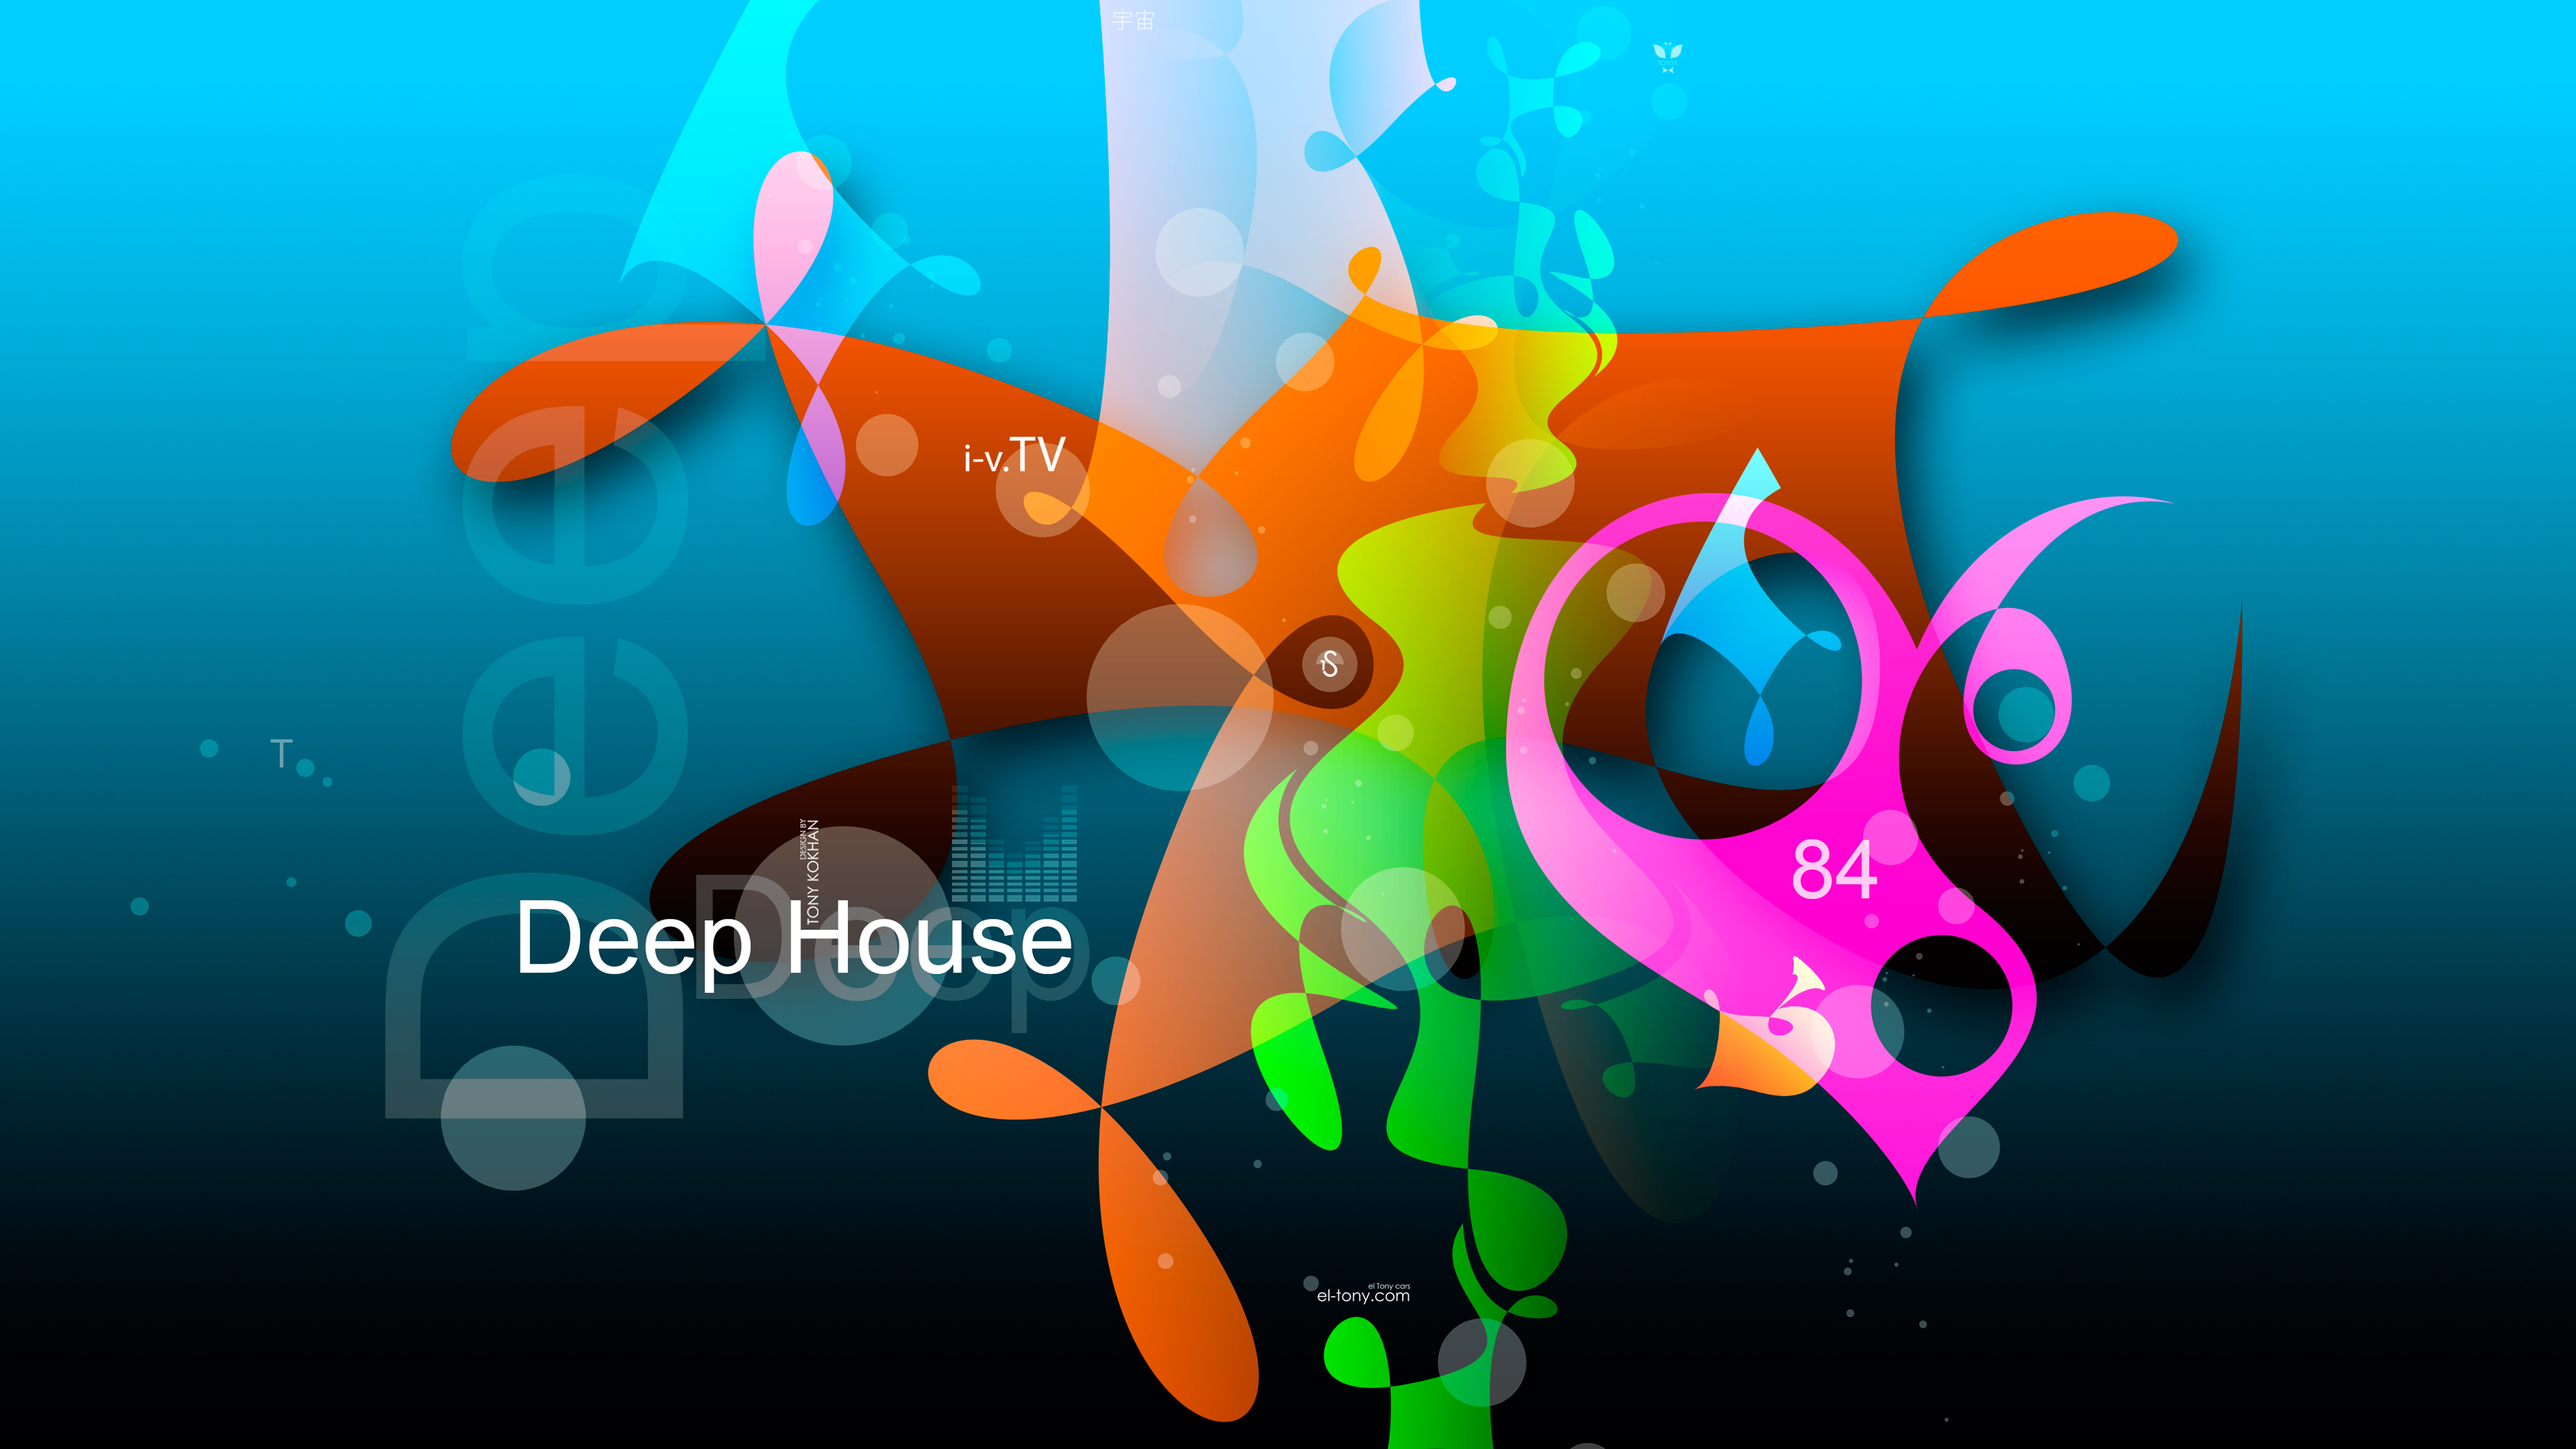 Deep-House-Music-eQ-SC-Eighty-Four-Abstract-Image-Sound-Words-TonyStyle-Art